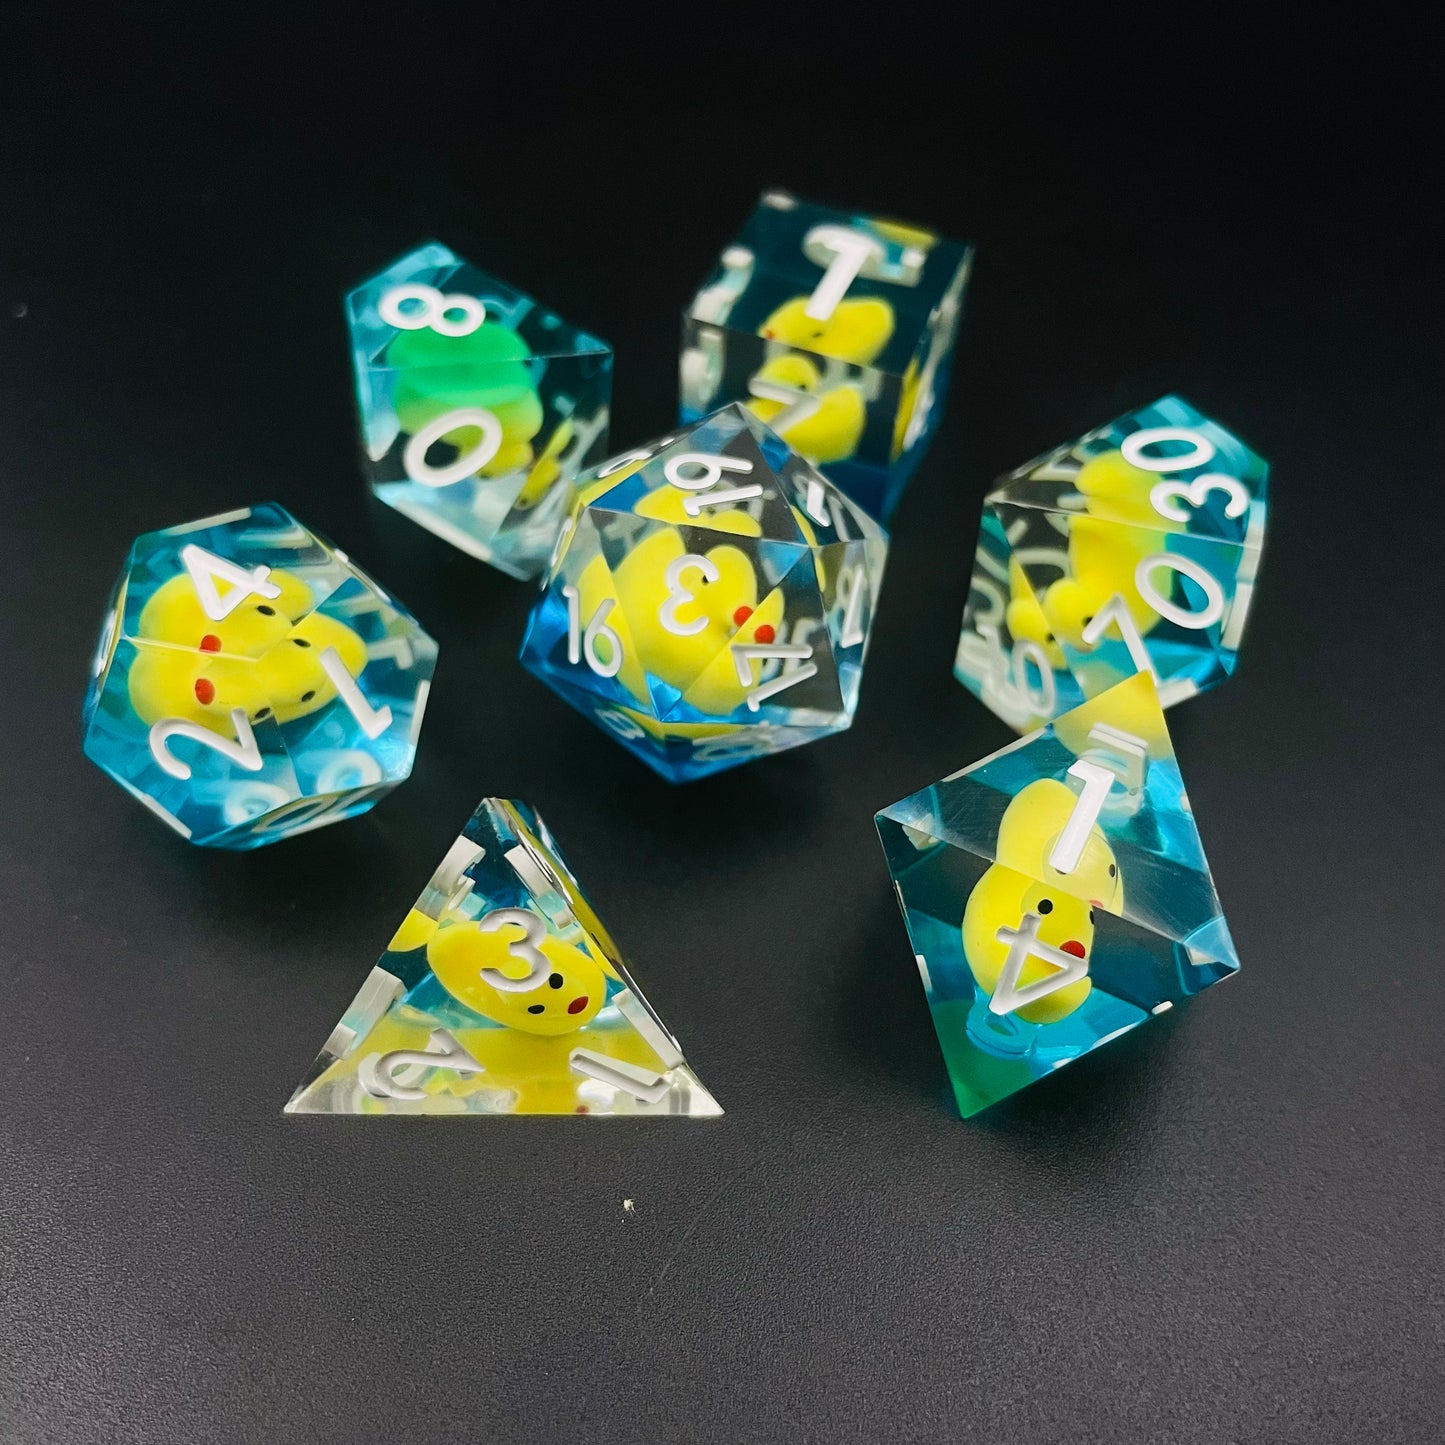 FREE Today: Duck Resin Pointed Dice  (Give away a random dice set)